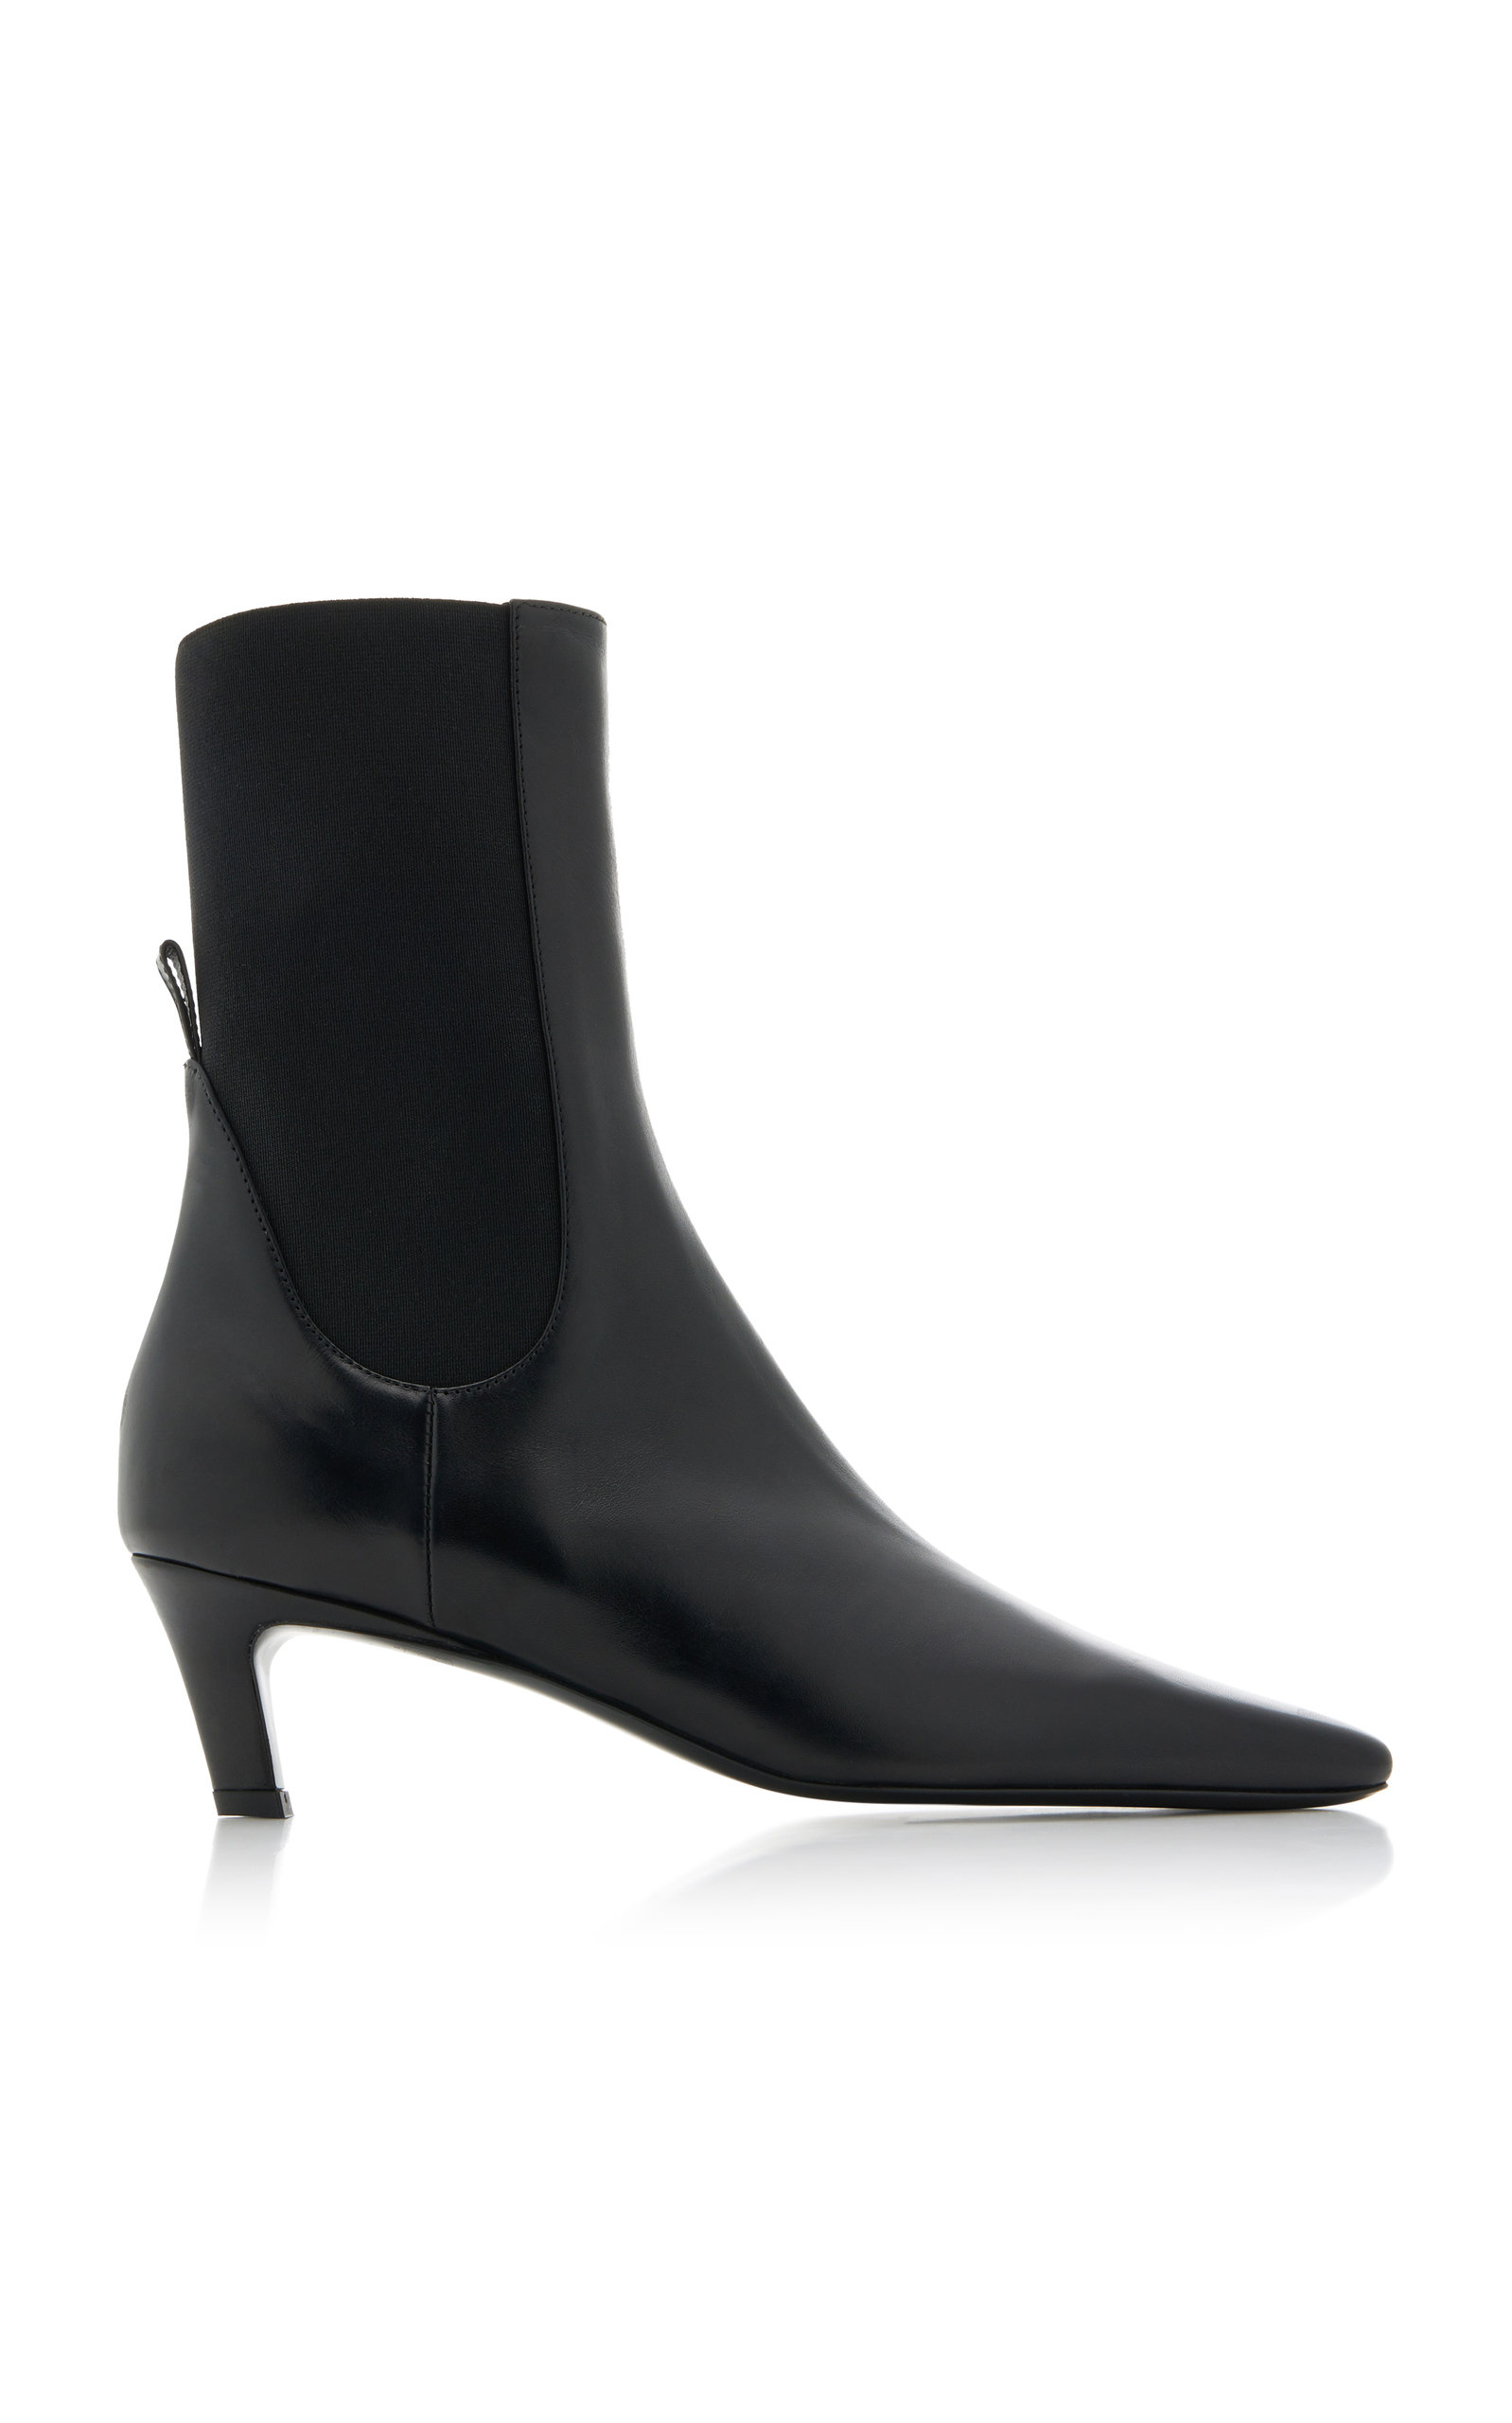 The Mid Heel Leather Boots